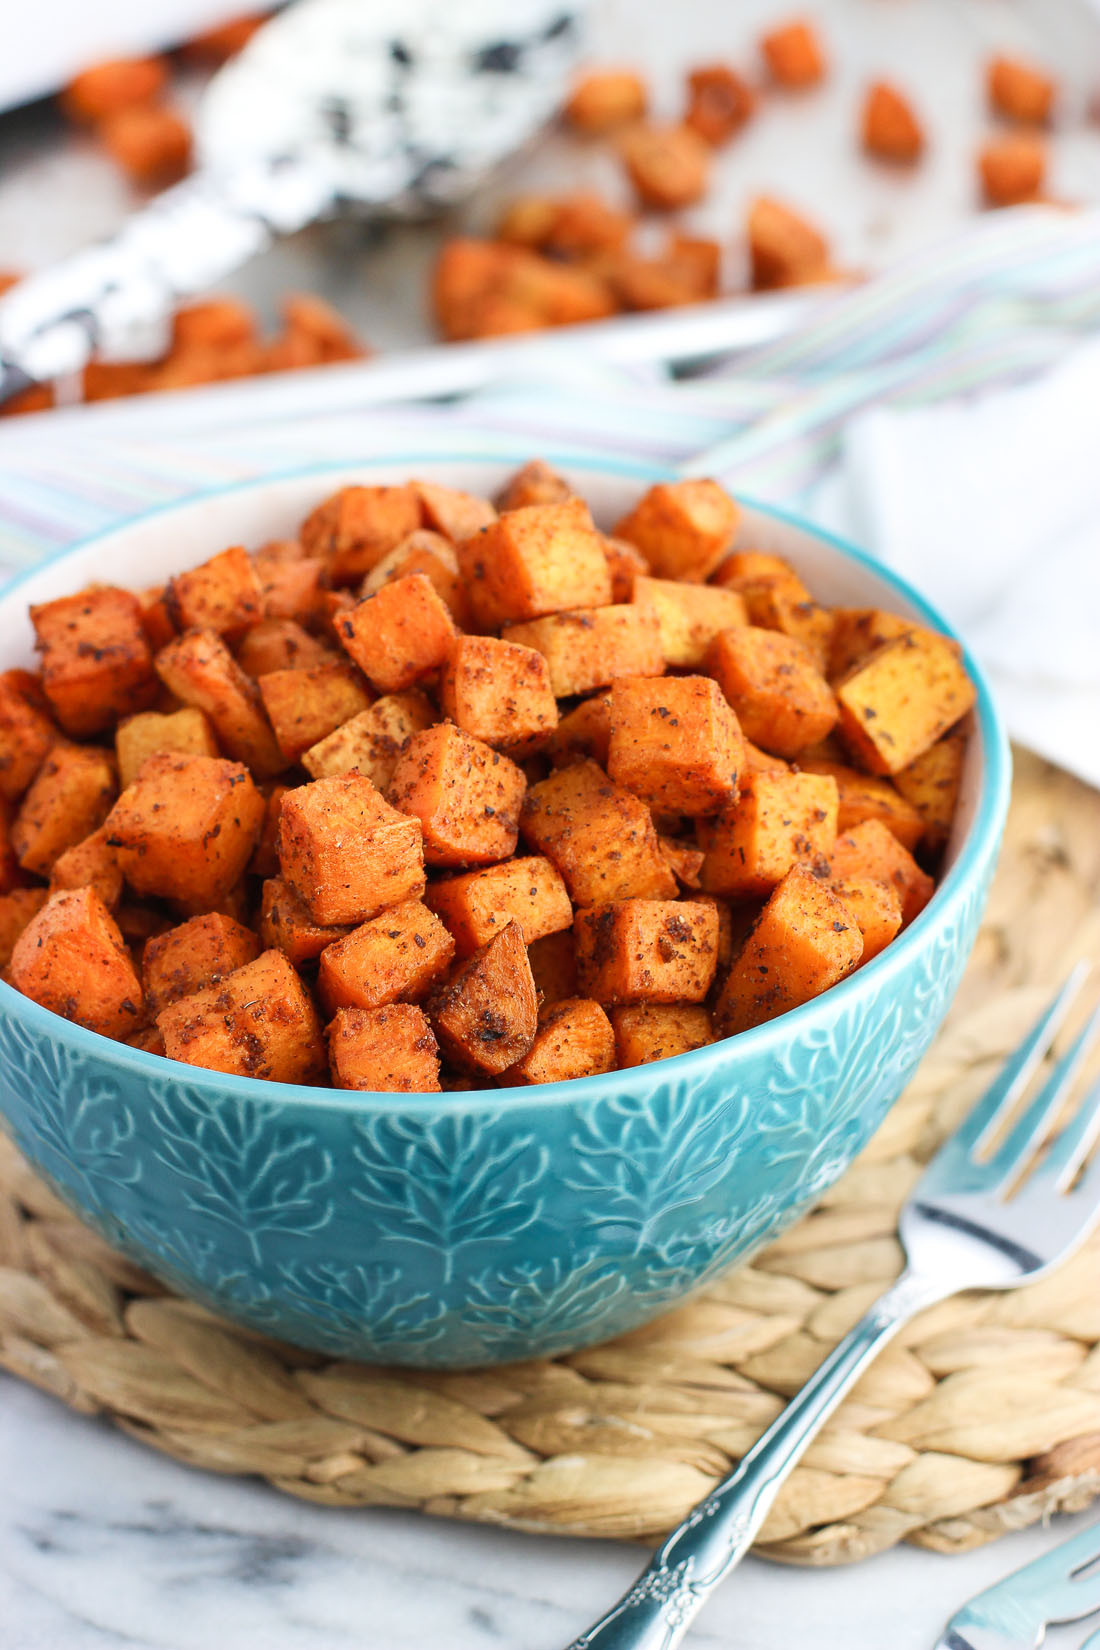 Healthy Oven Roasted Sweet Potatoes
 Spiced Oven Roasted Sweet Potatoes